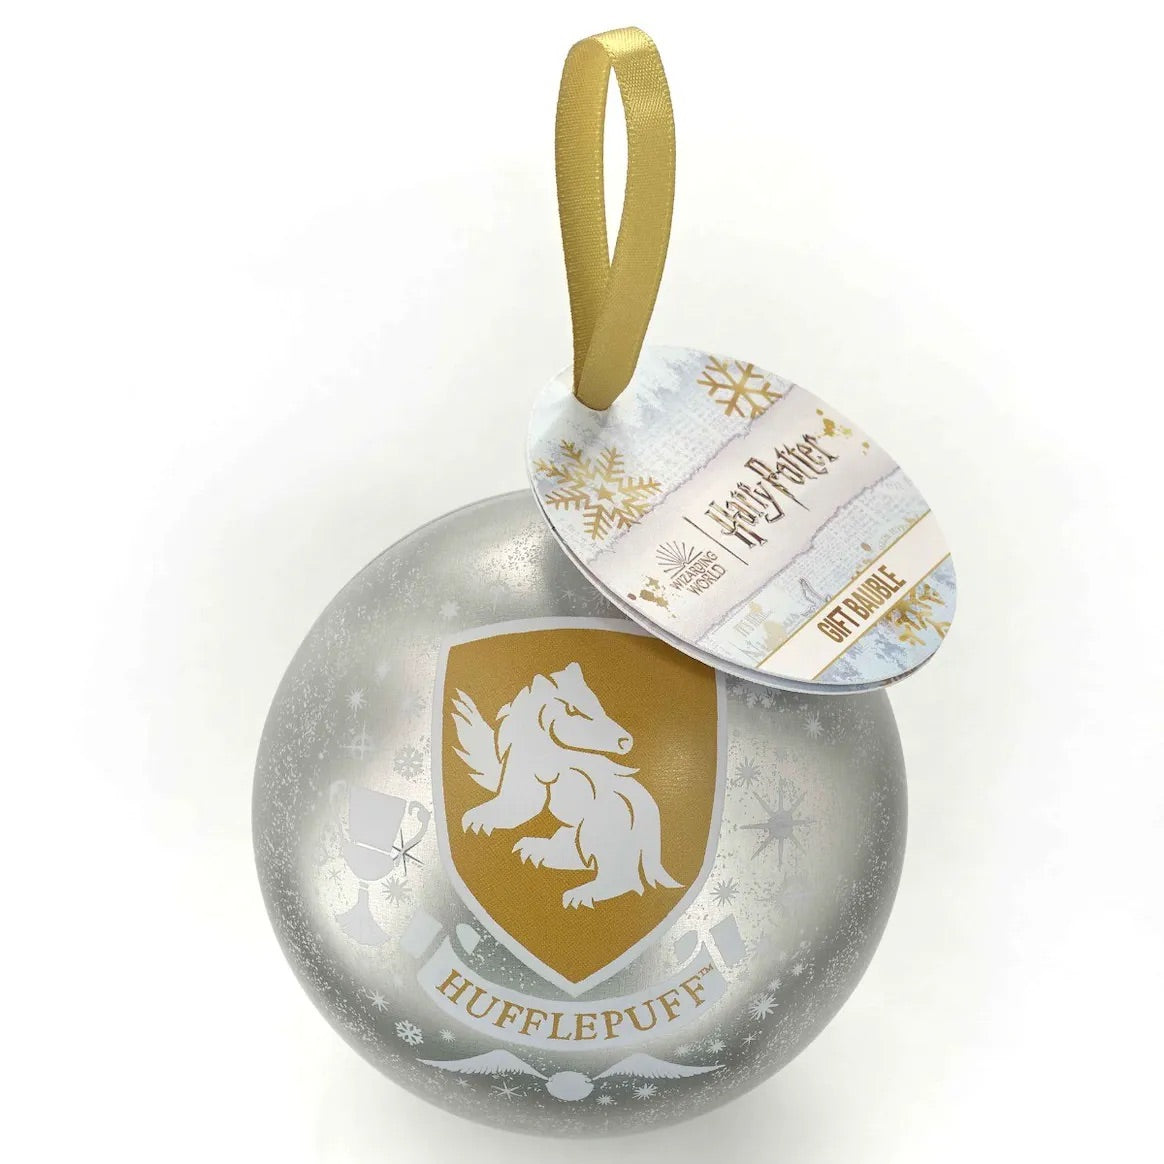 Official Harry Potter Hufflepuff Christmas Bauble with House Necklace